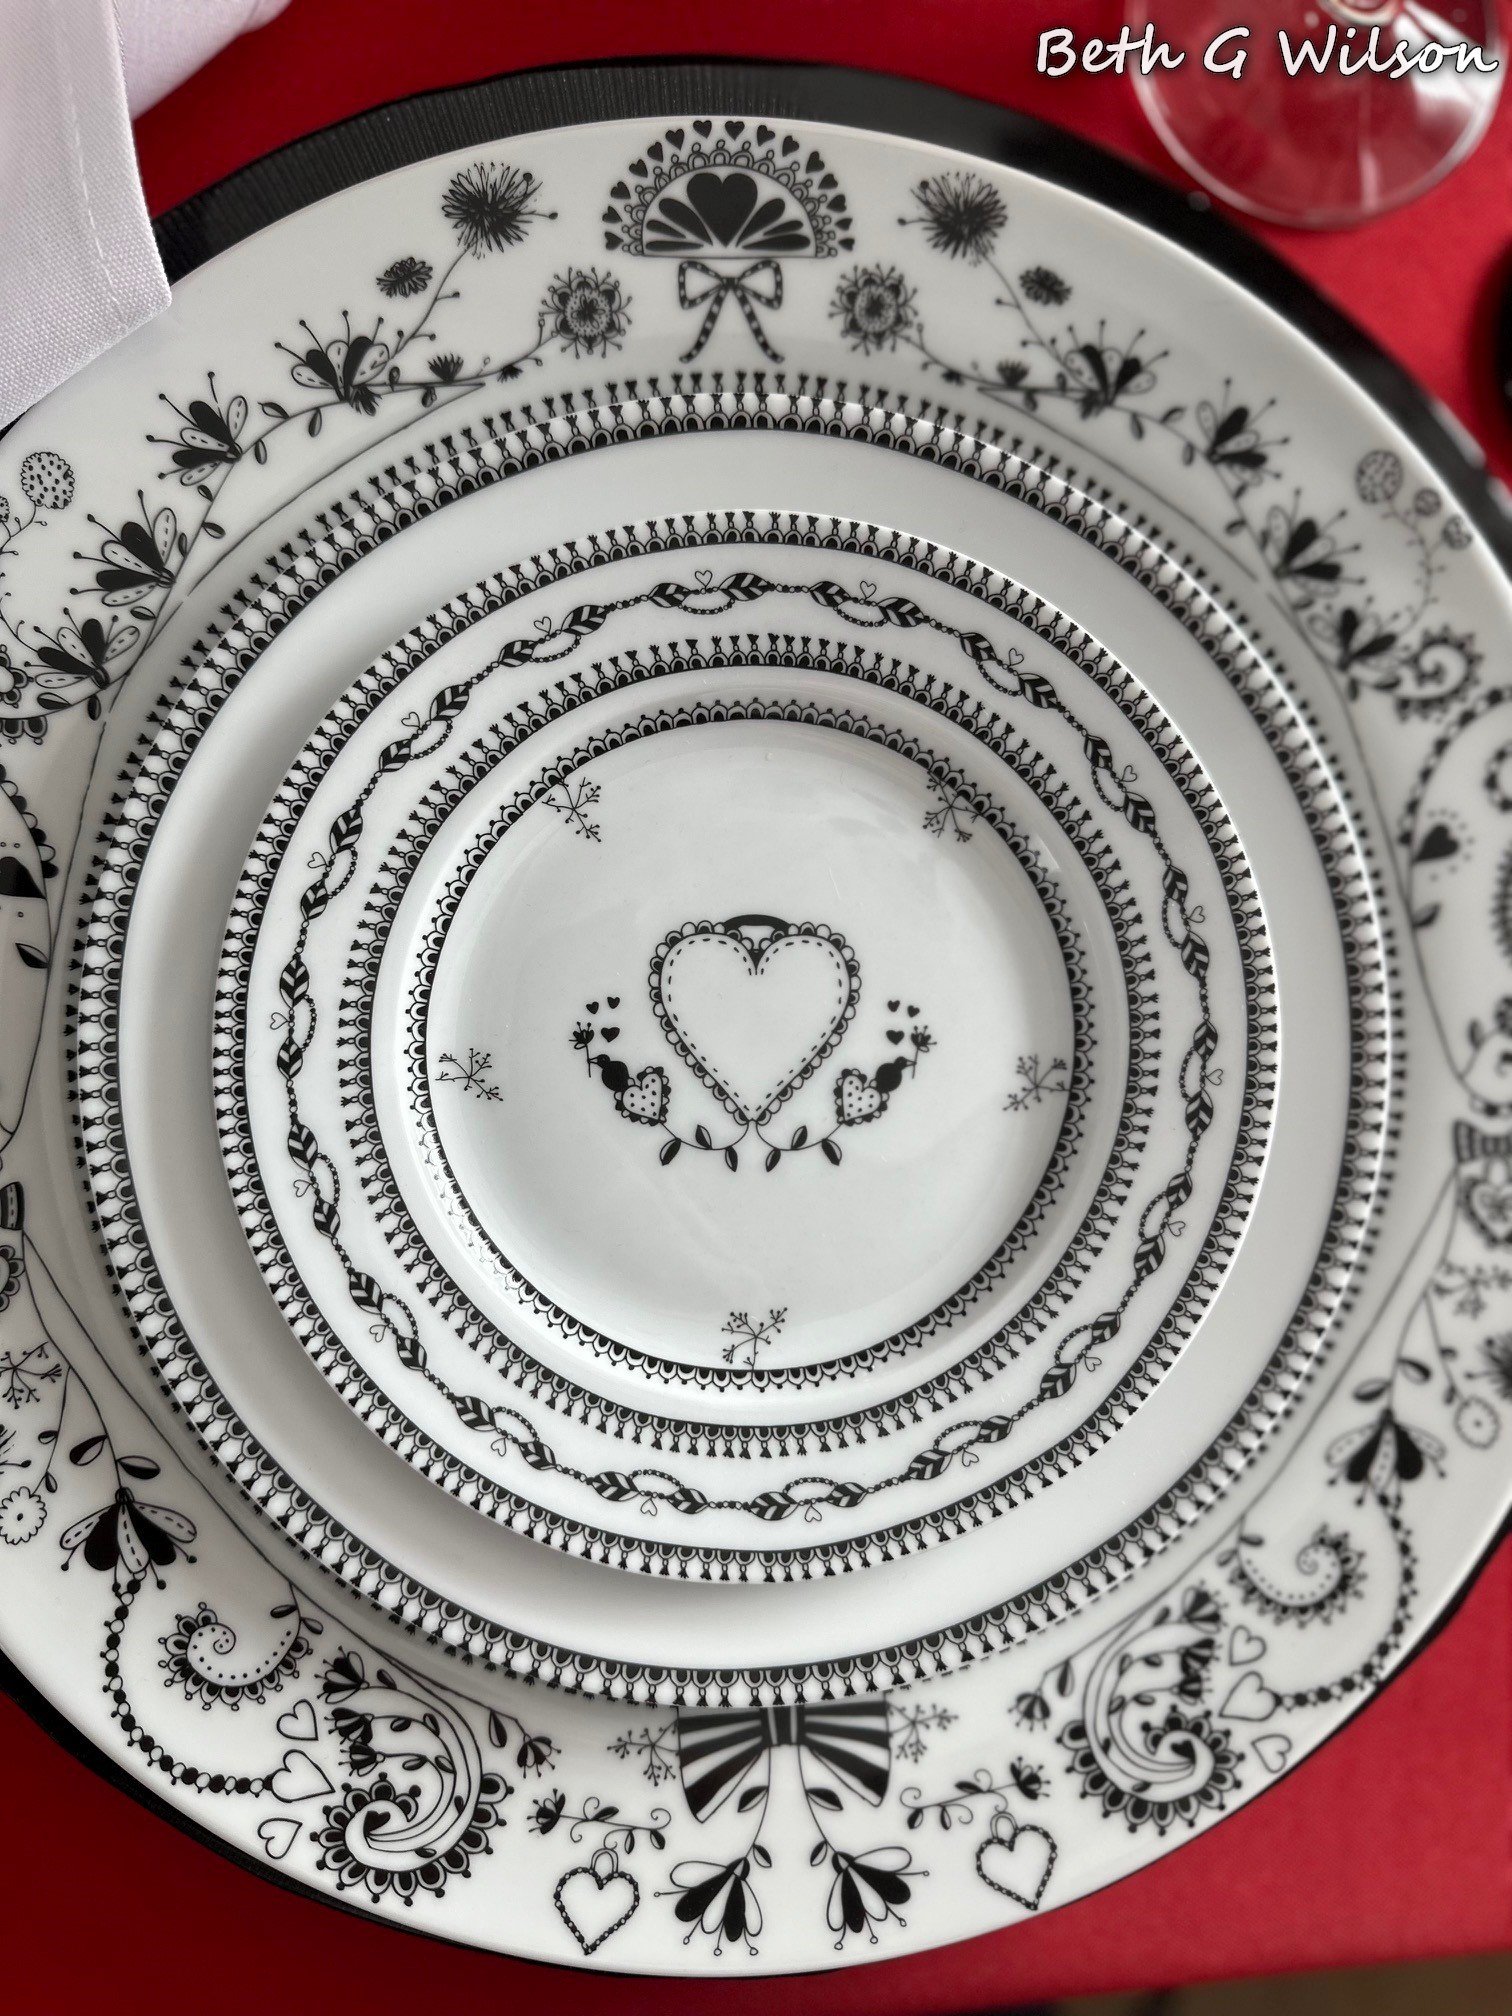 Valentine's Day Plates Set and Cups